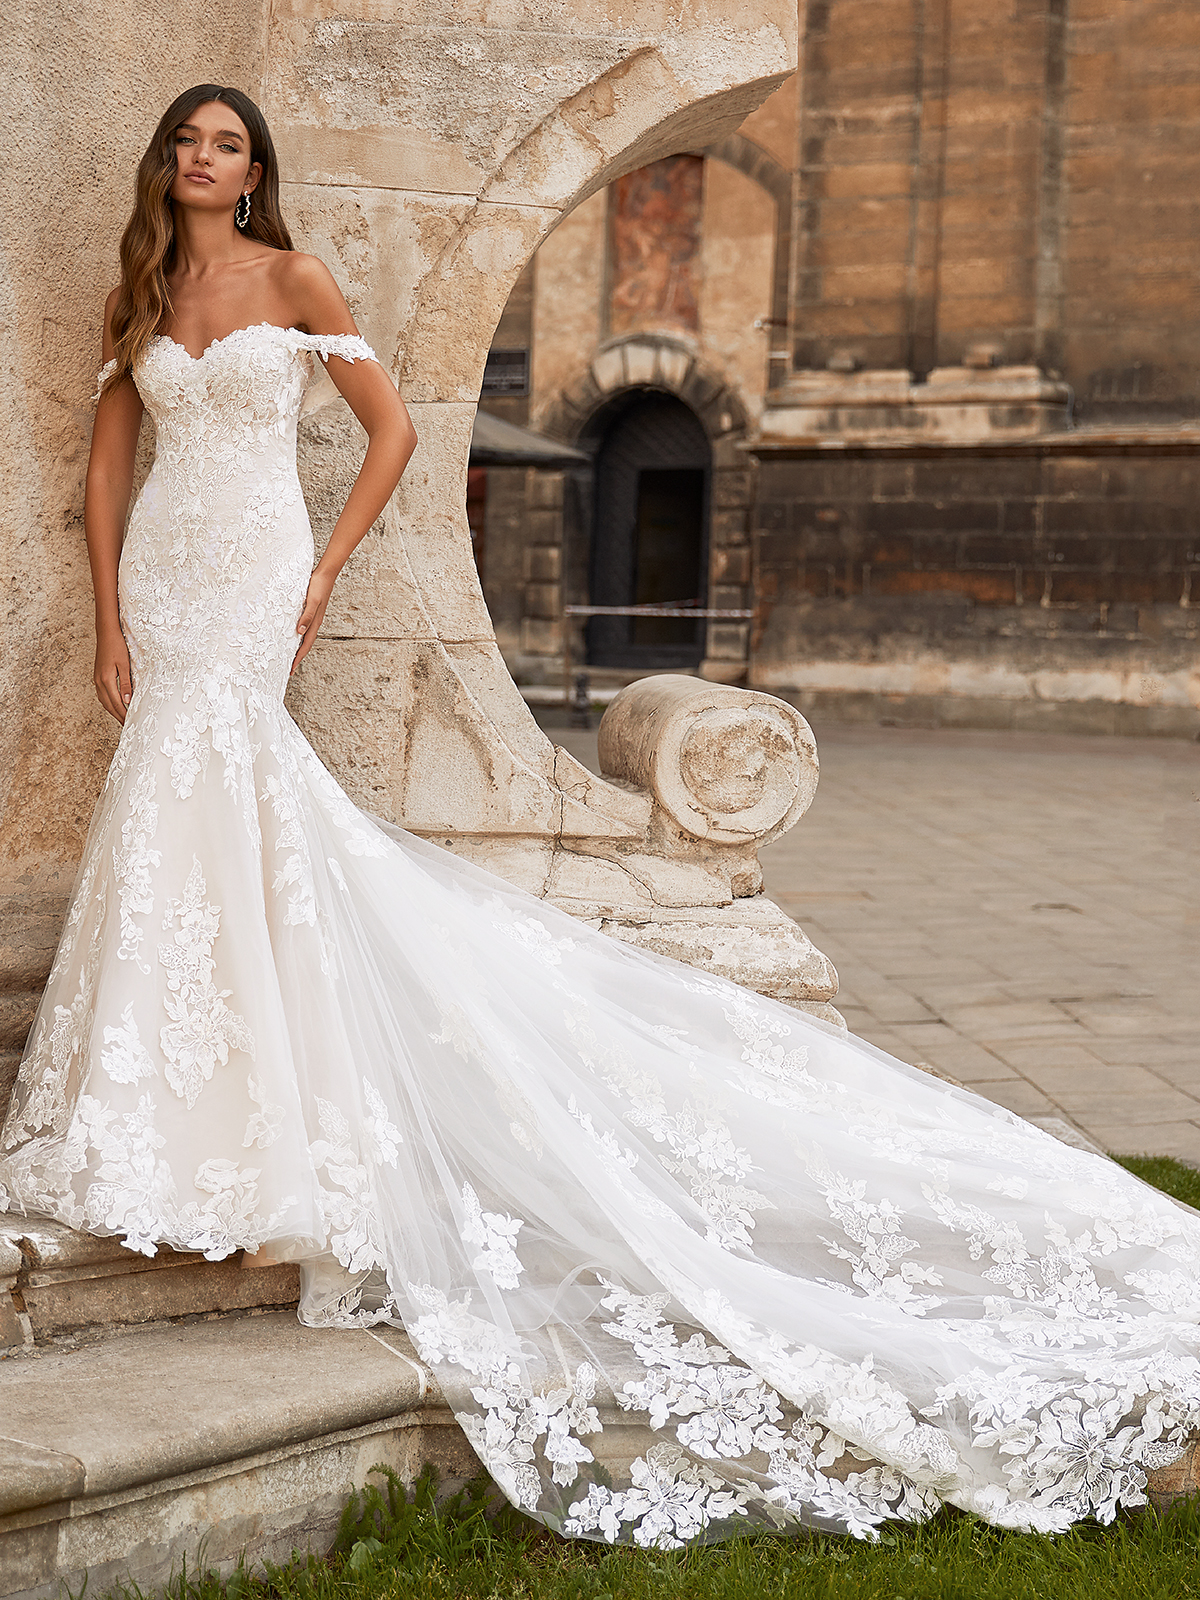 Mermaid vs Trumpet Wedding Dress - What’s the Difference?